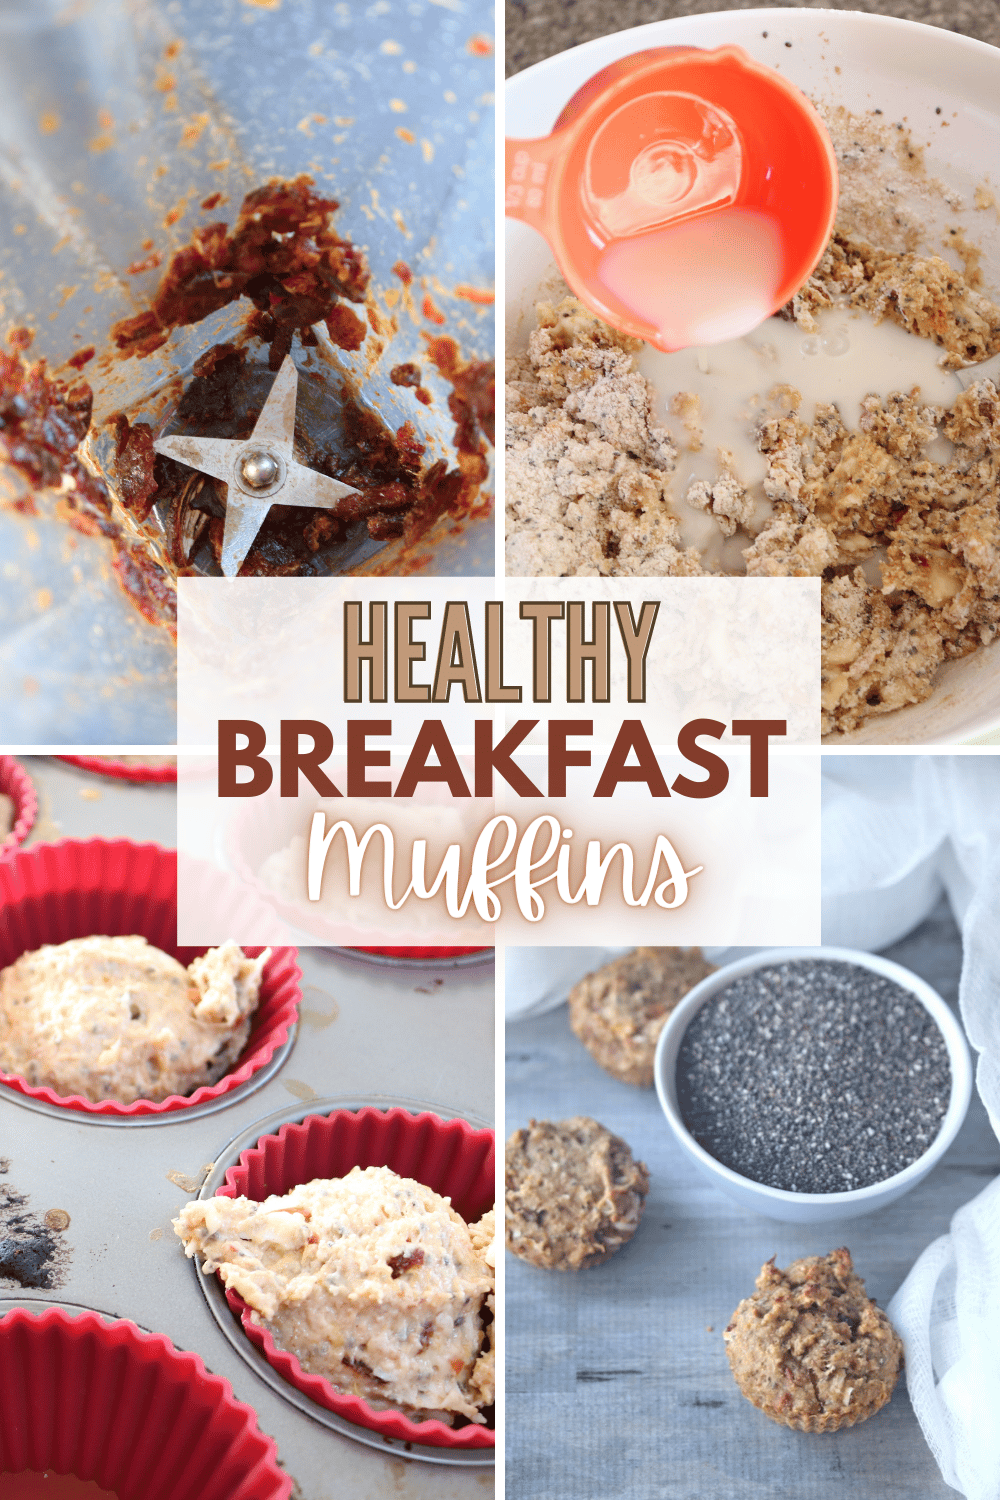 These Healthy Breakfast Muffins are not only delicious and easy to make but also incredibly nutritious. What a great way to start your day! #healthybreakfastmuffins #healthyminibananamuffins #healthymuffins #healthybreakfast via @wondermomwannab